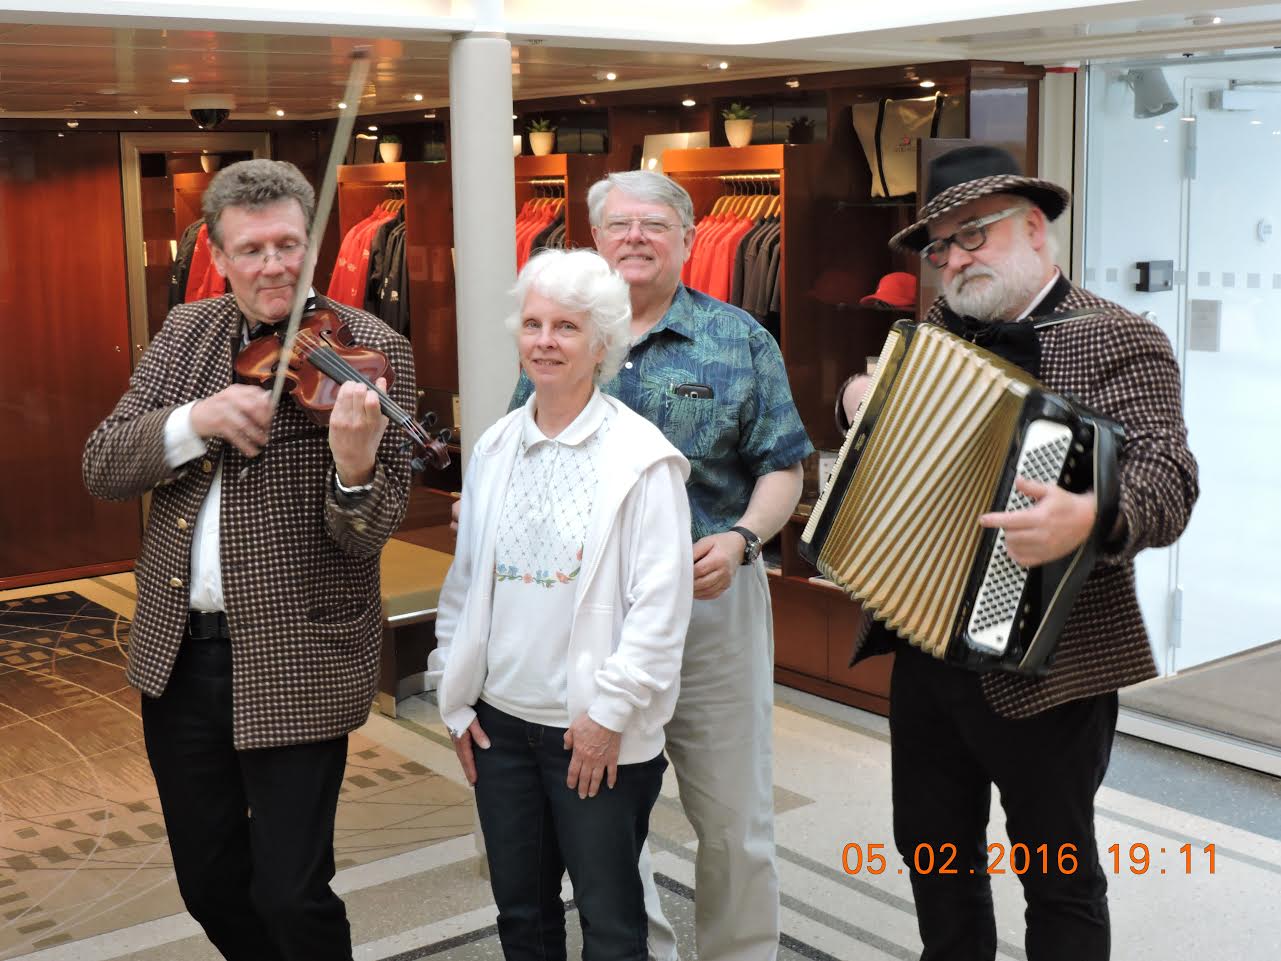 Mary. Enjoyed our Viking River Cruise immensely. Attached is a photo of us with one of the nightly entertainments that they had.  Greg and Mary Benes